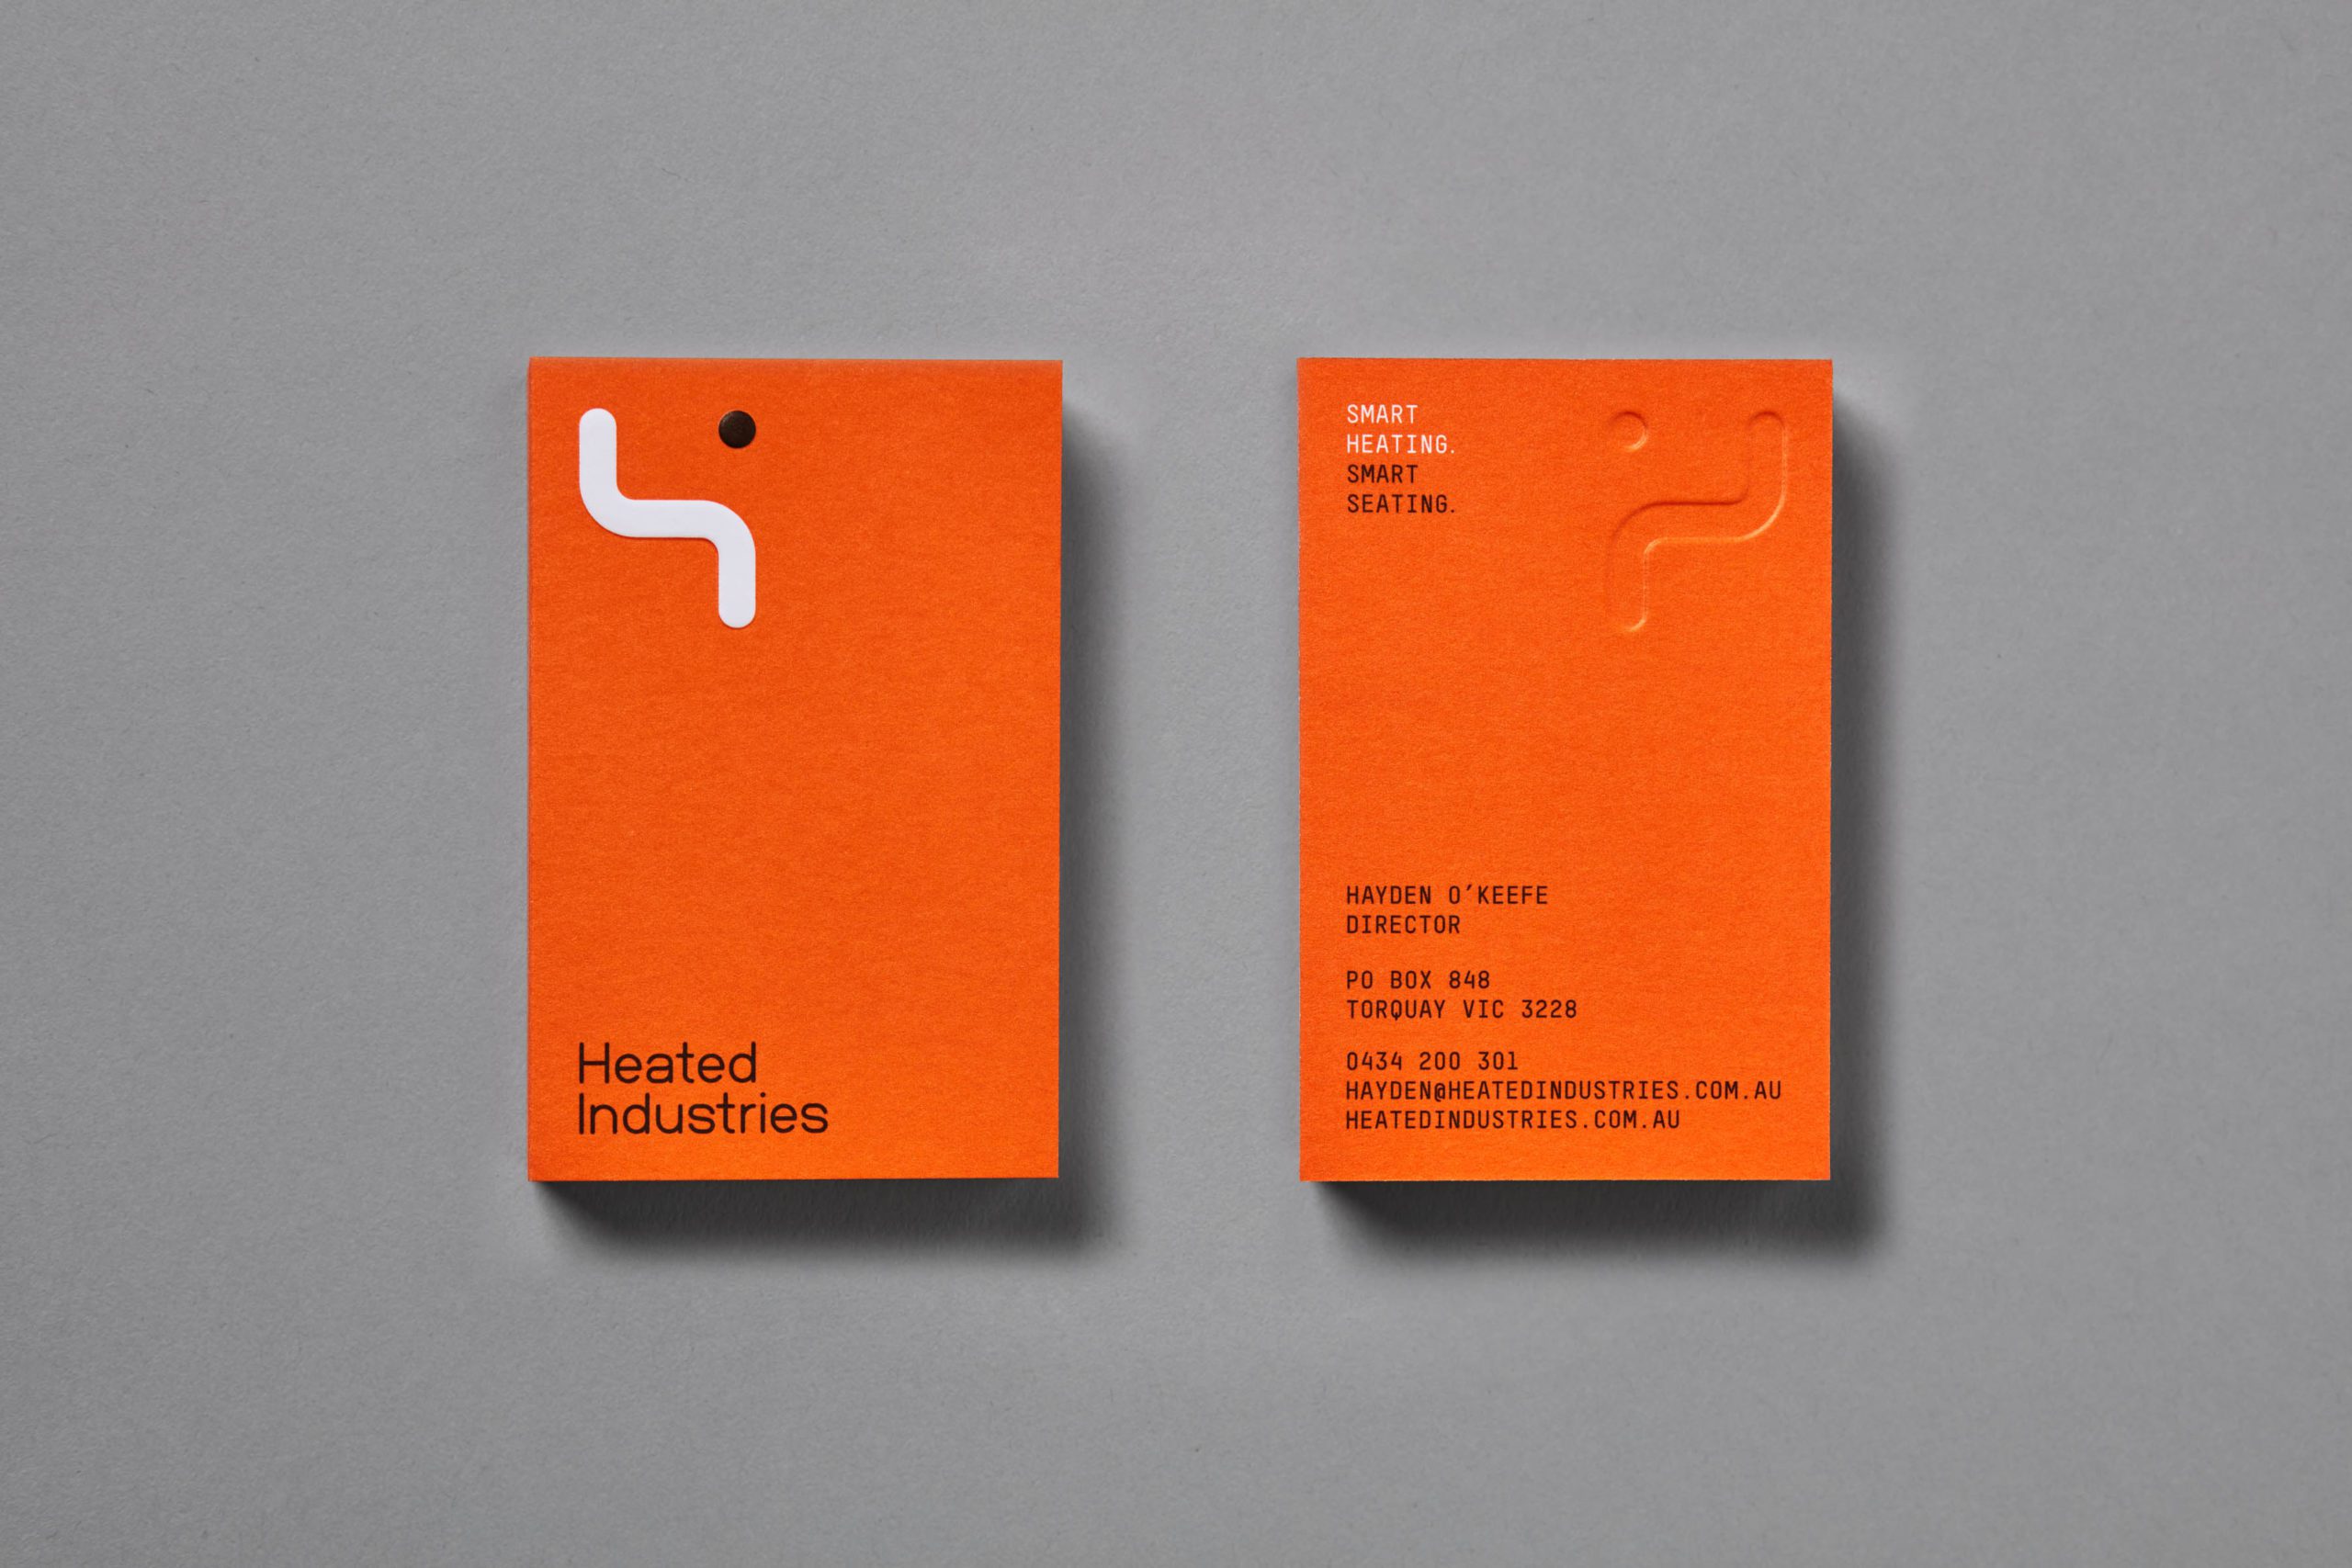 Heated Industries business card showcasing both front and back sides.